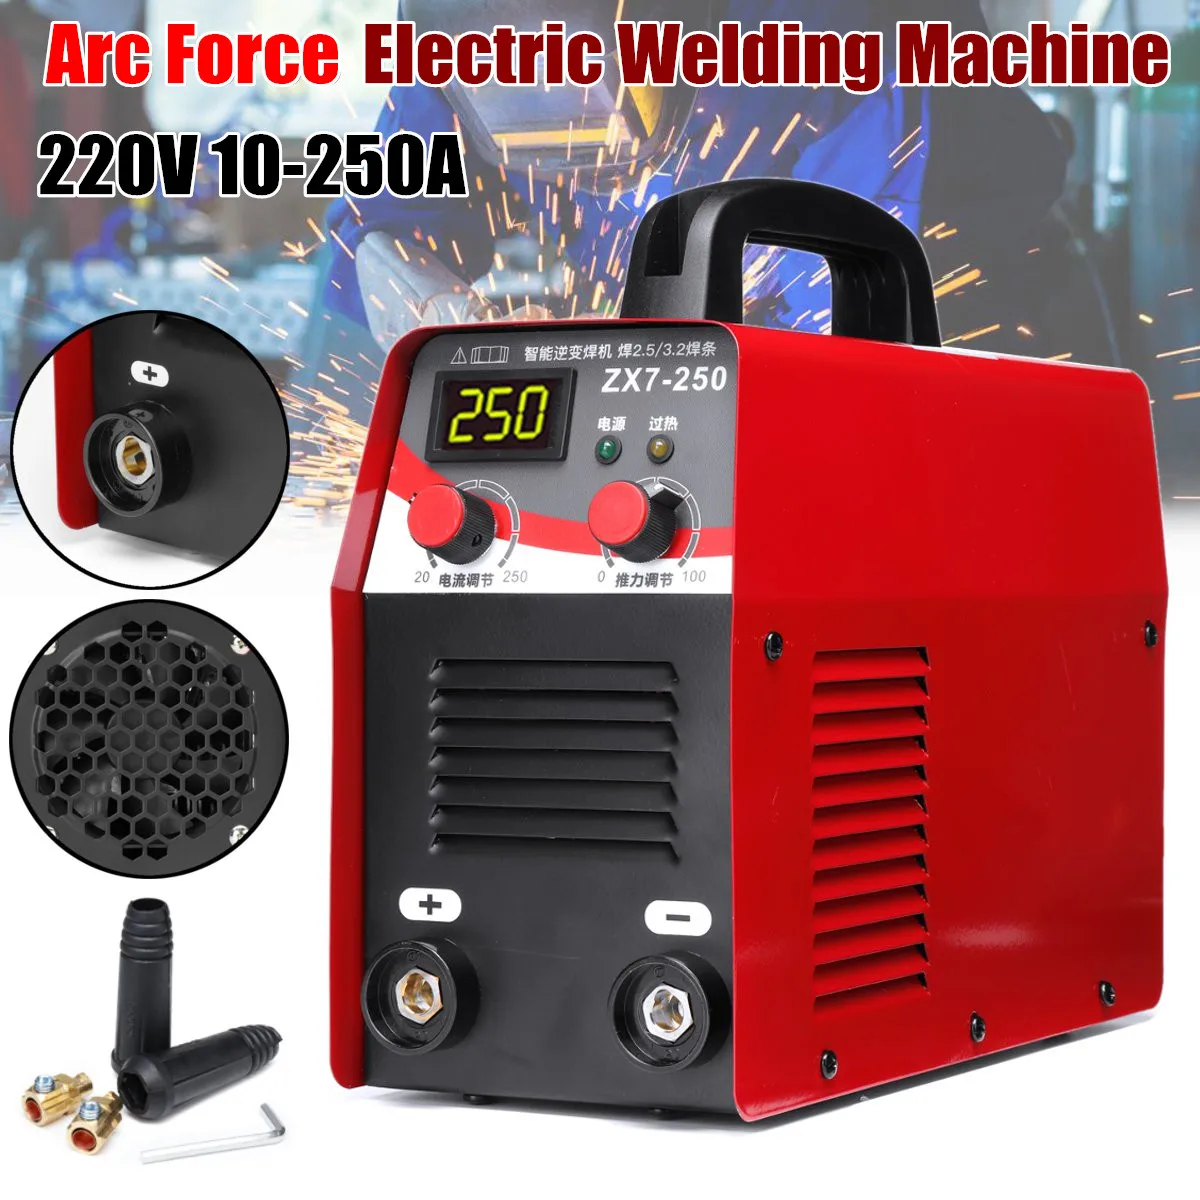 110V-220V 9.5 KW/11.5 KW ZX7-250 ZX7-315 Arc Force 